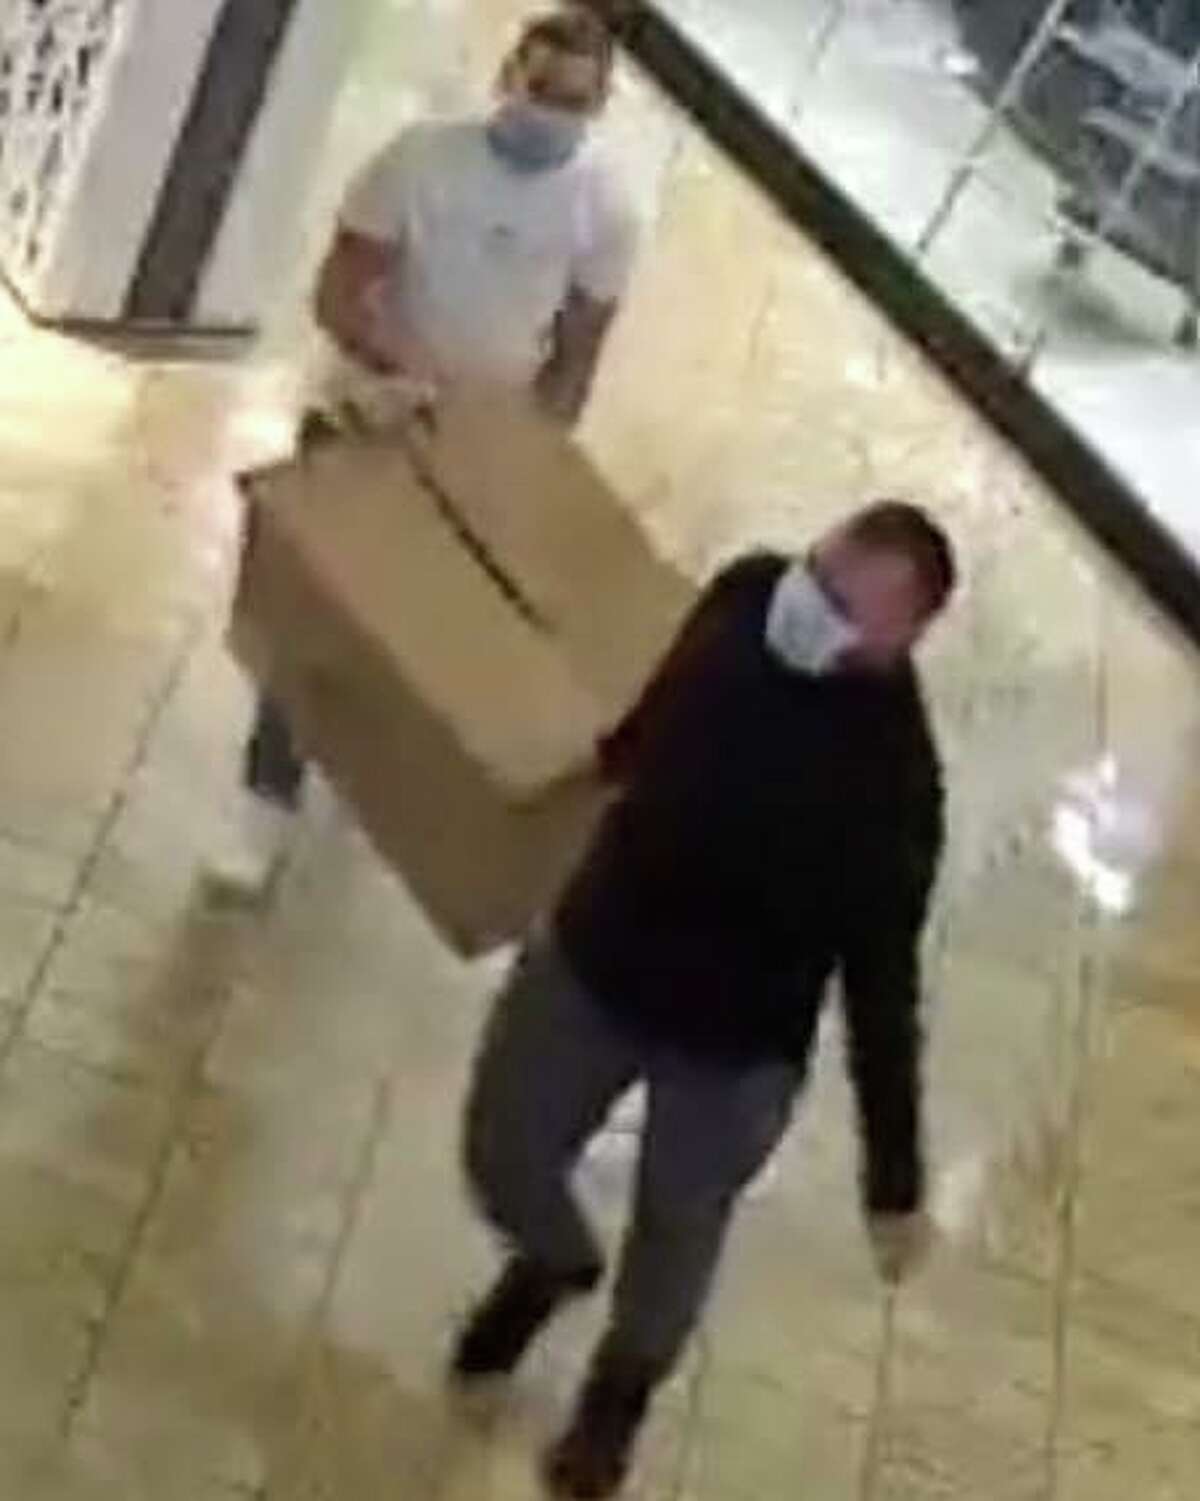 Police are attempting to identify these men who used stolen debit cards at the Dick’s Sporting Goods in Milford earlier this month.